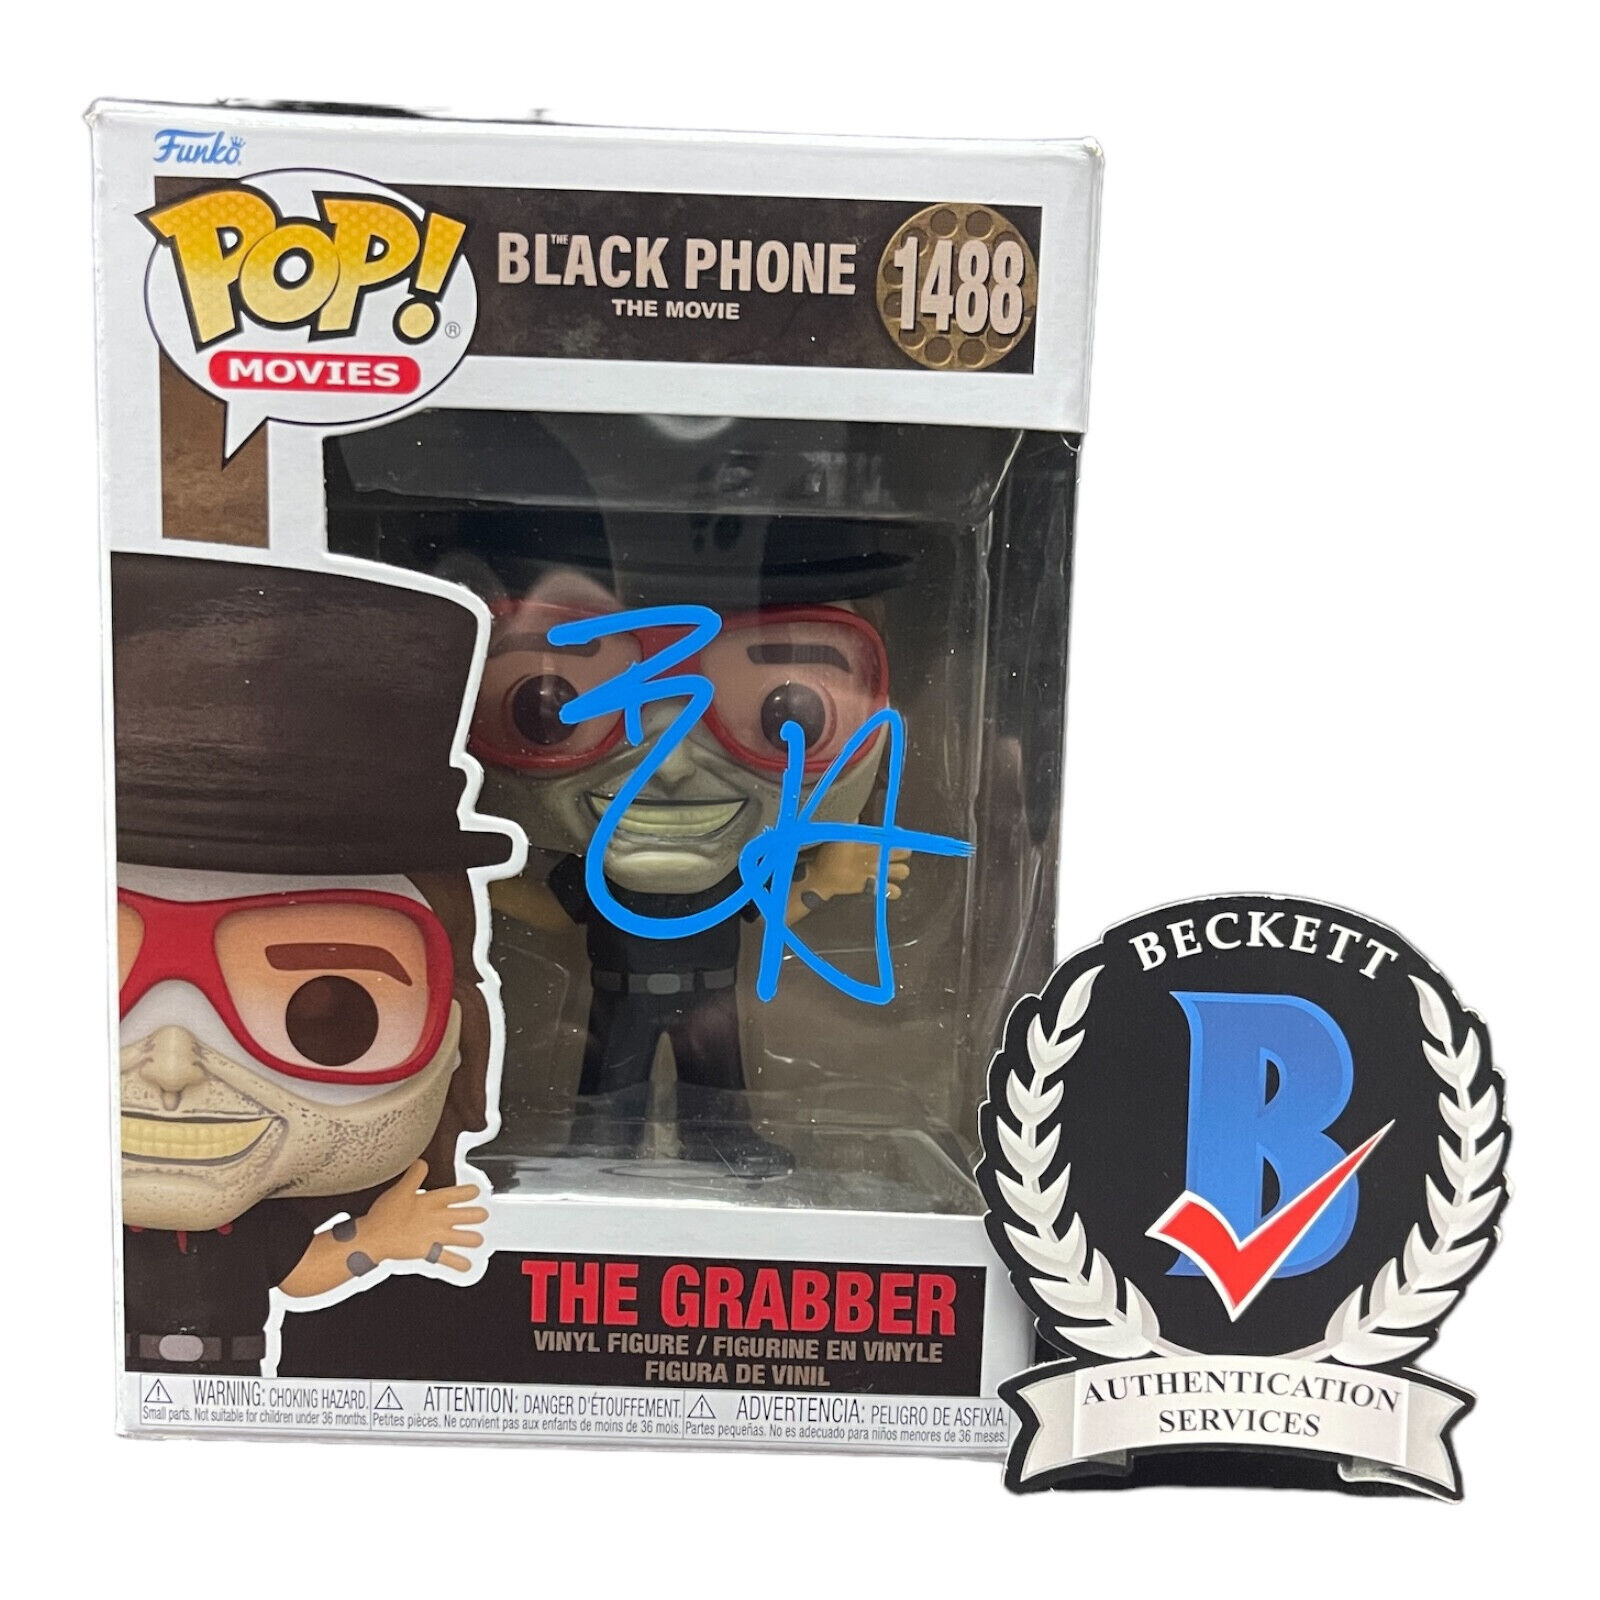 Ethan Hawke Signed Autograph The Black Phone Funko Pop 1488 Beckett The Grabber